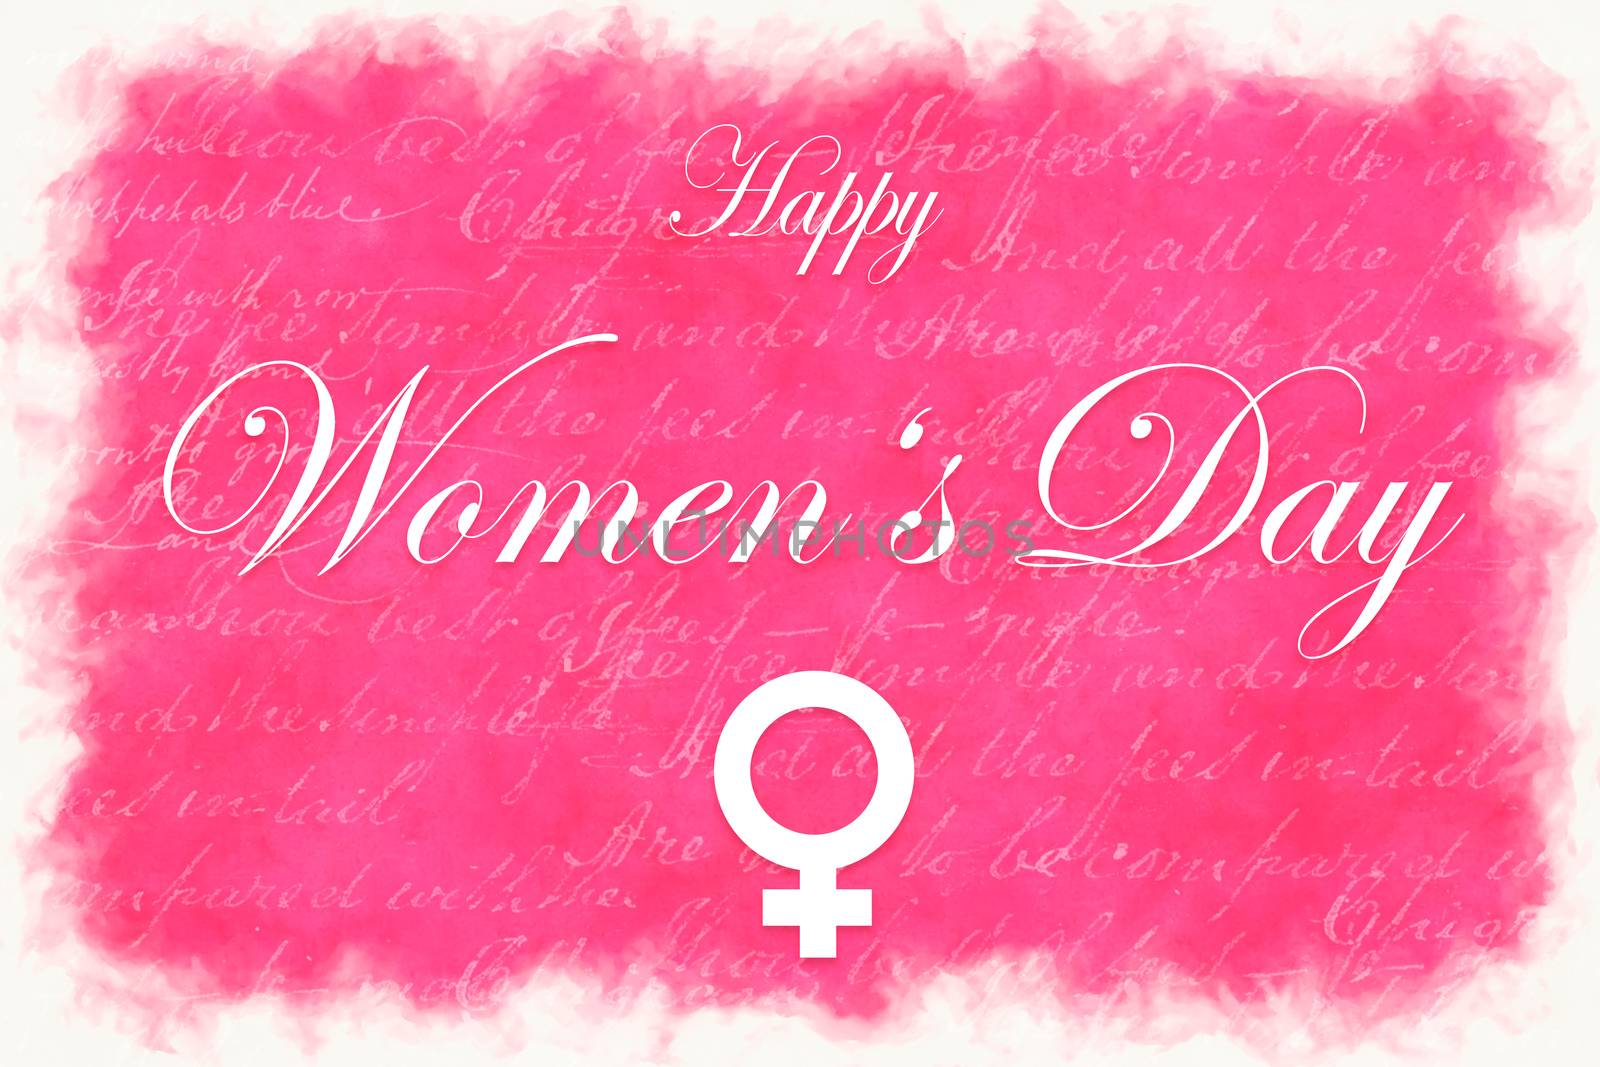 Pink illustration card with text Happy Women's Day by w20er